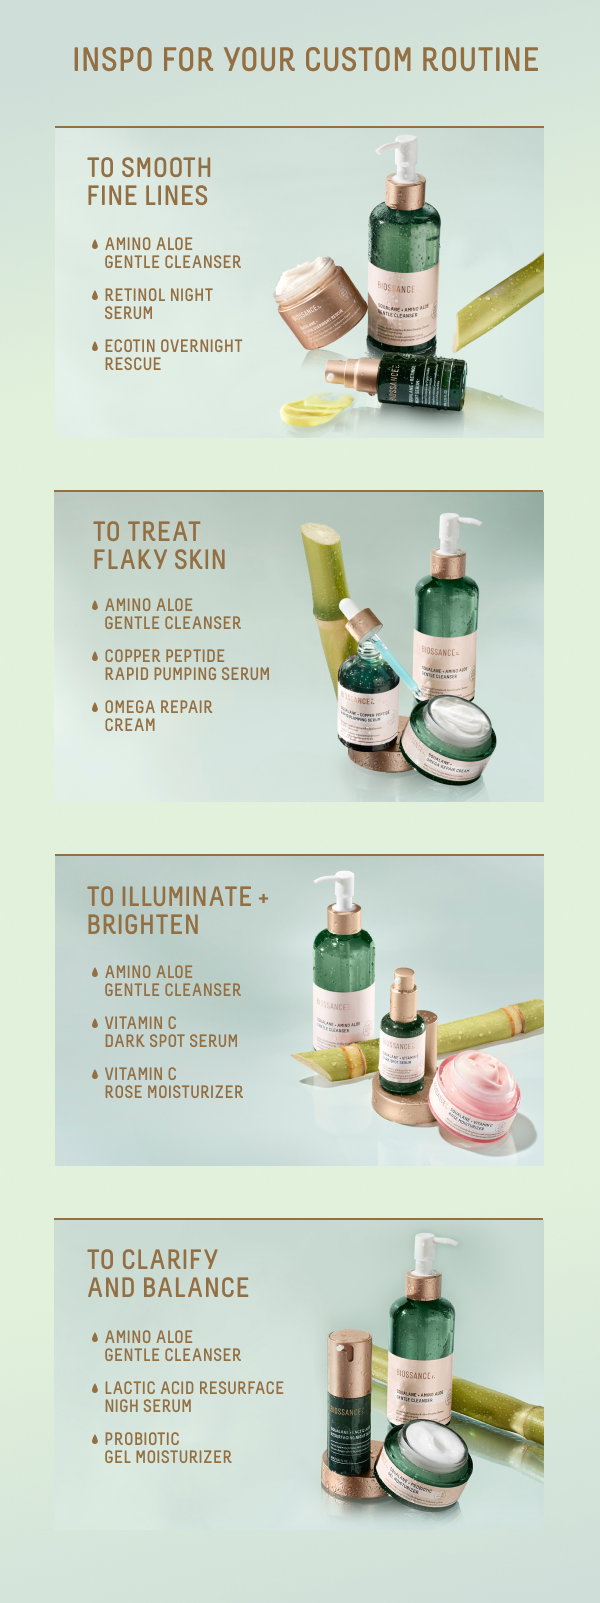 Benefits That Go Beyond Cleansing